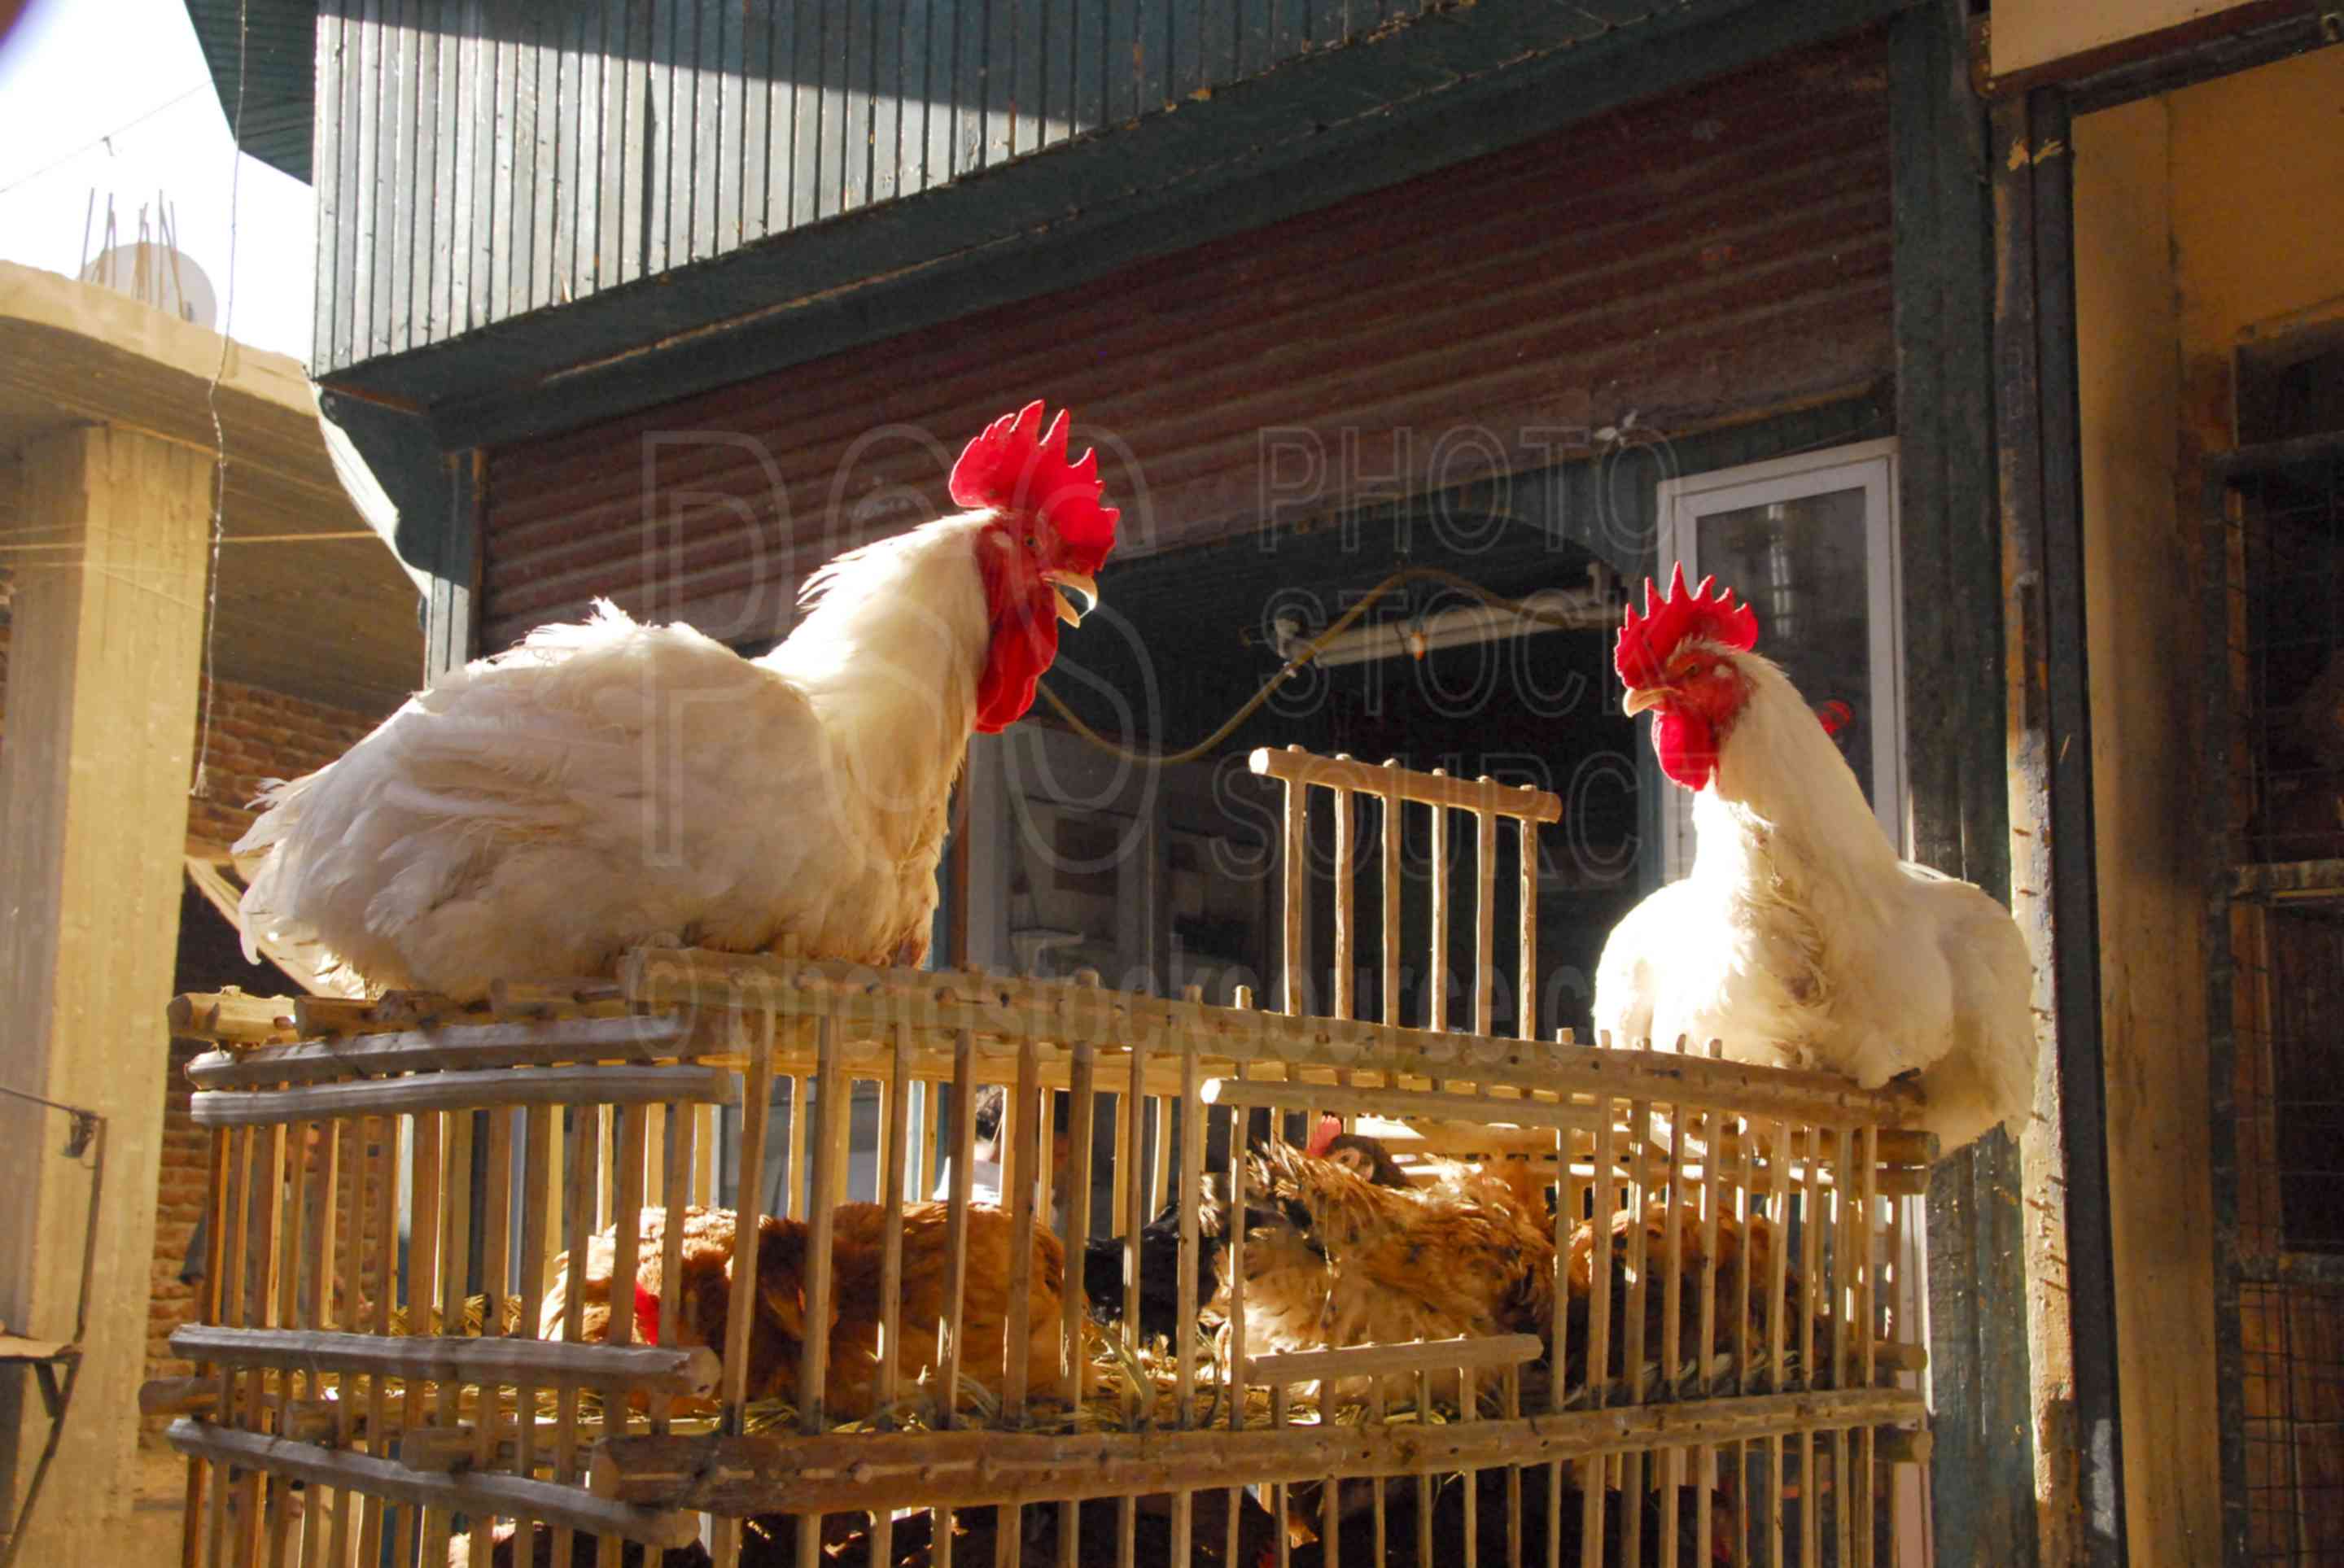 Chickens for Sale,market,shopping,seller,vendor,shoppers,birds,chickens,cage